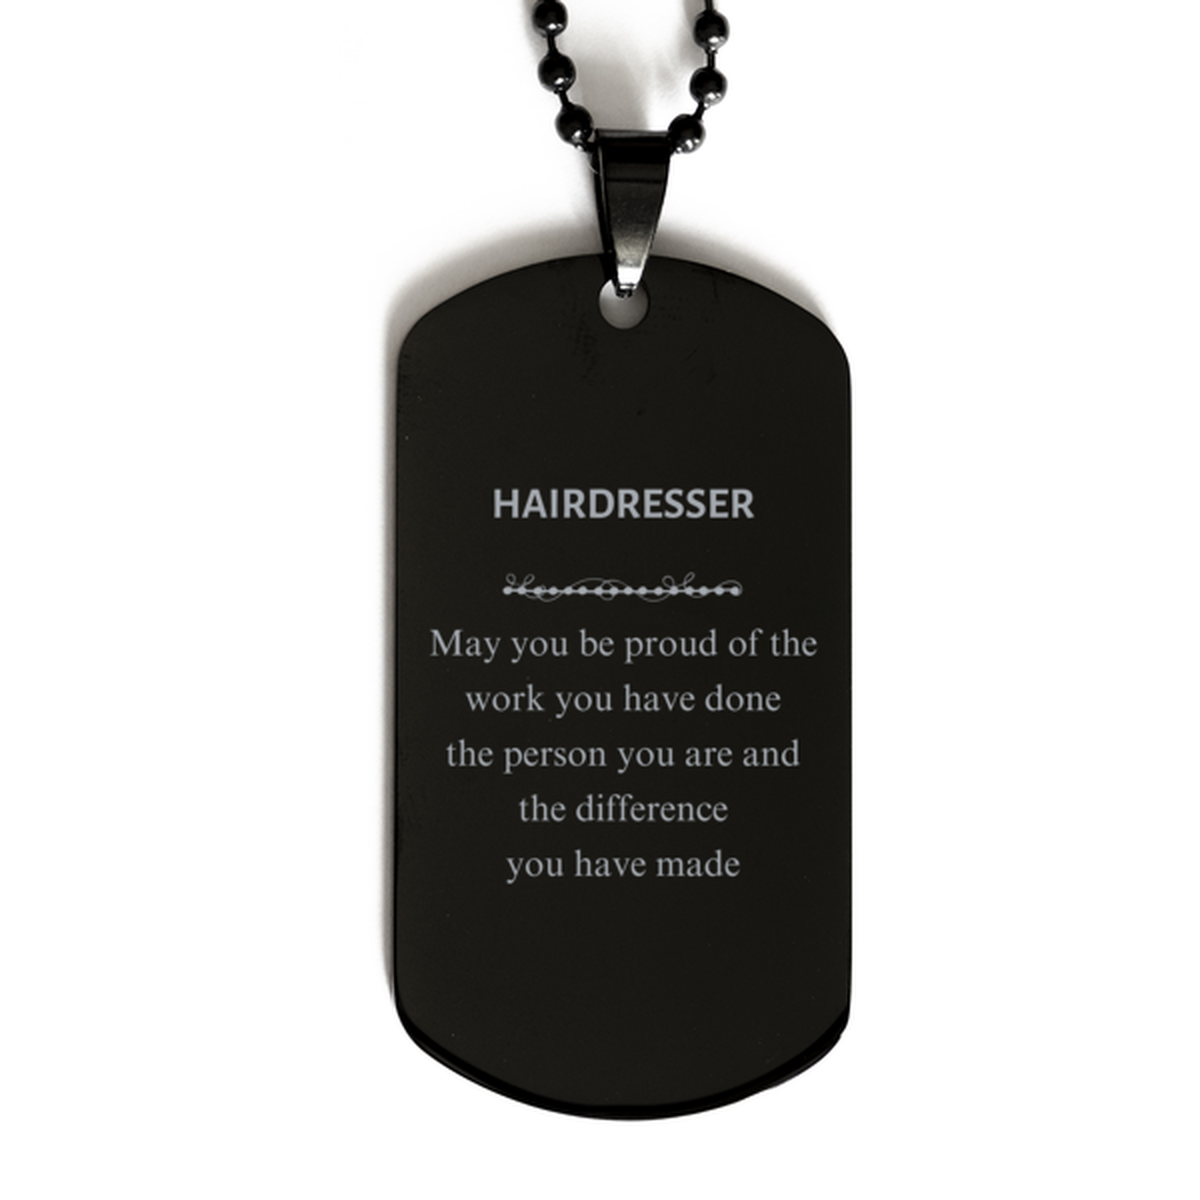 Hairdresser May you be proud of the work you have done, Retirement Hairdresser Black Dog Tag for Colleague Appreciation Gifts Amazing for Hairdresser